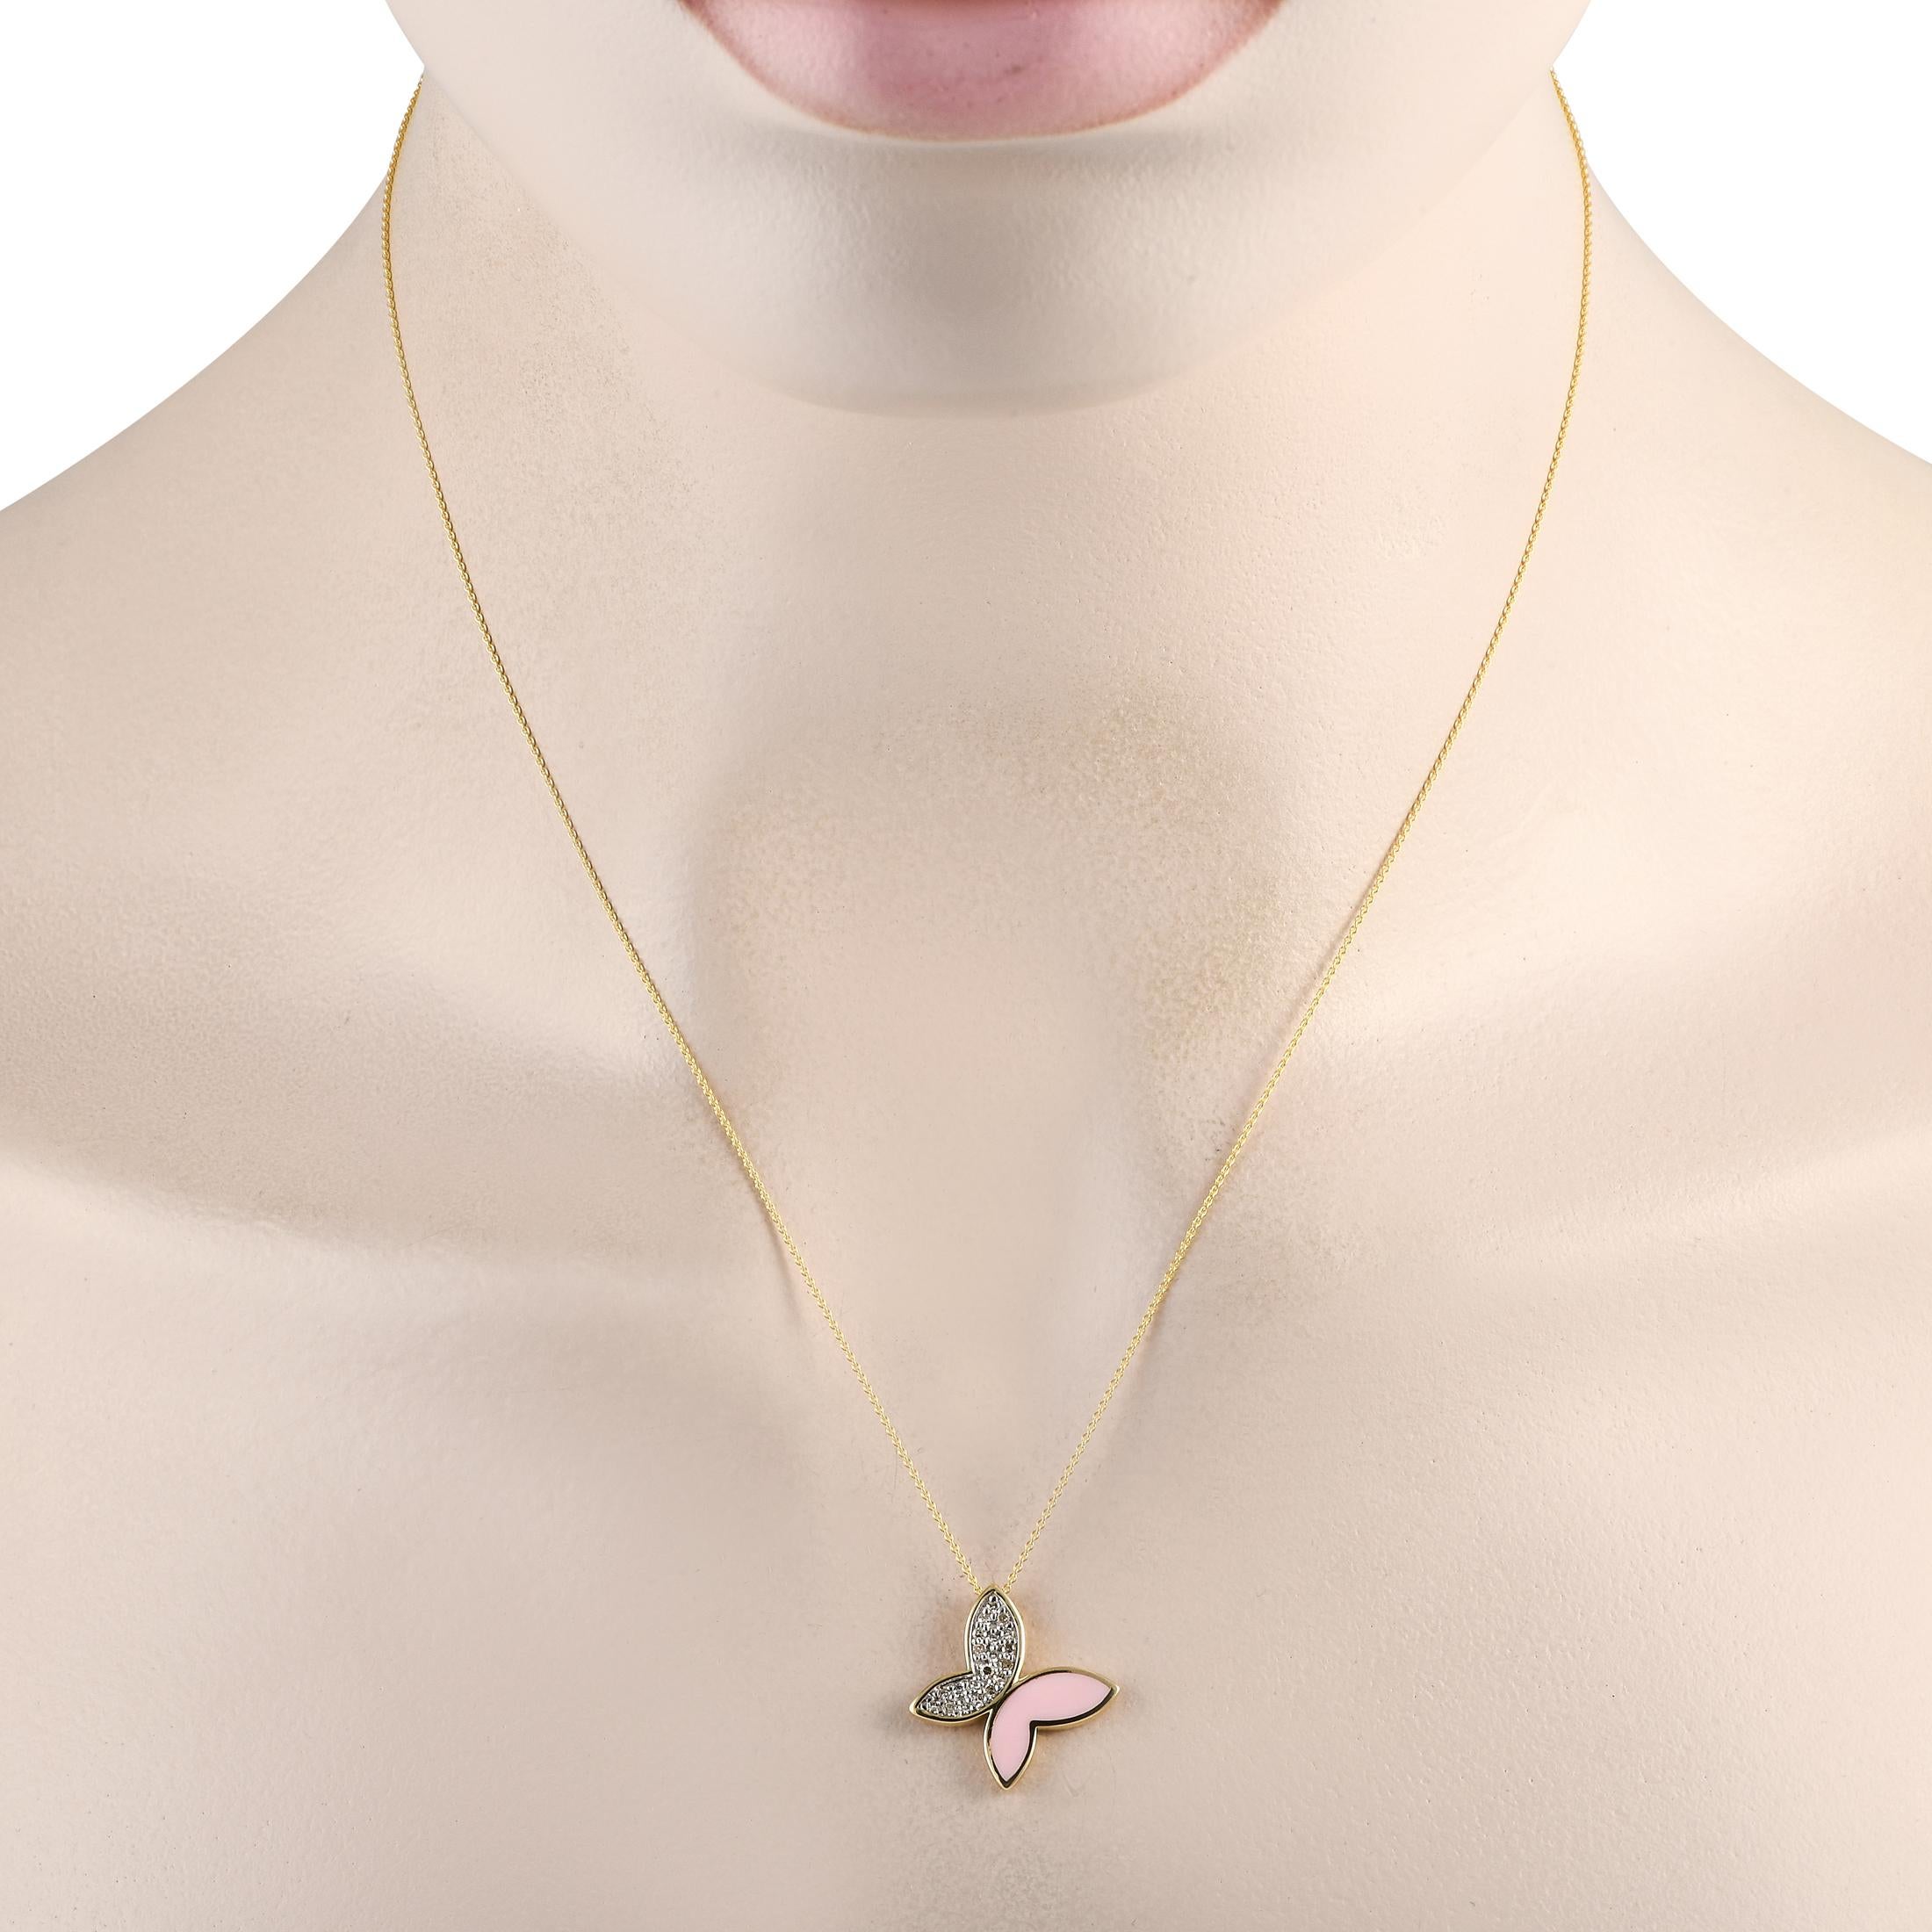 On this exquisite necklace, a charming butterfly pendant comes to life thanks to Diamonds totaling 0.15 carats and a pink inlaid accent. The pendant measures 14K Yellow Gold and measures 0.75 round.This jewelry piece is offered in brand new